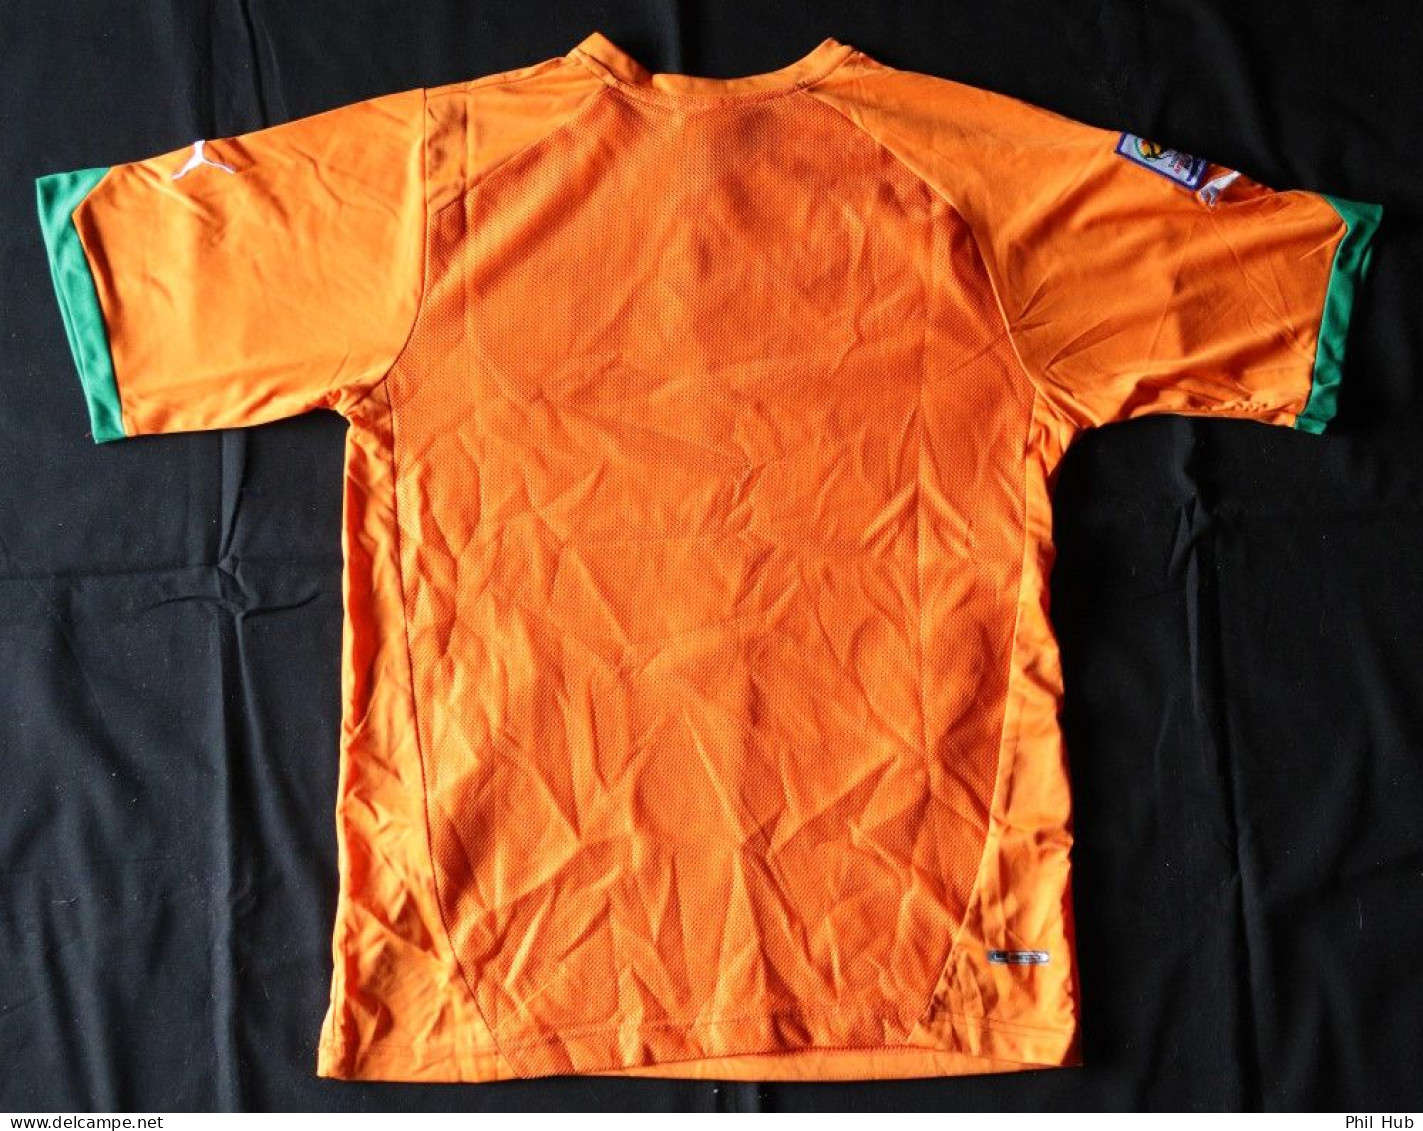 IVORY COAST Shirt 2010 Edition Soccer Football - Size L - NEW ***BANK TRANSFER ONLY *** - Habillement, Souvenirs & Autres